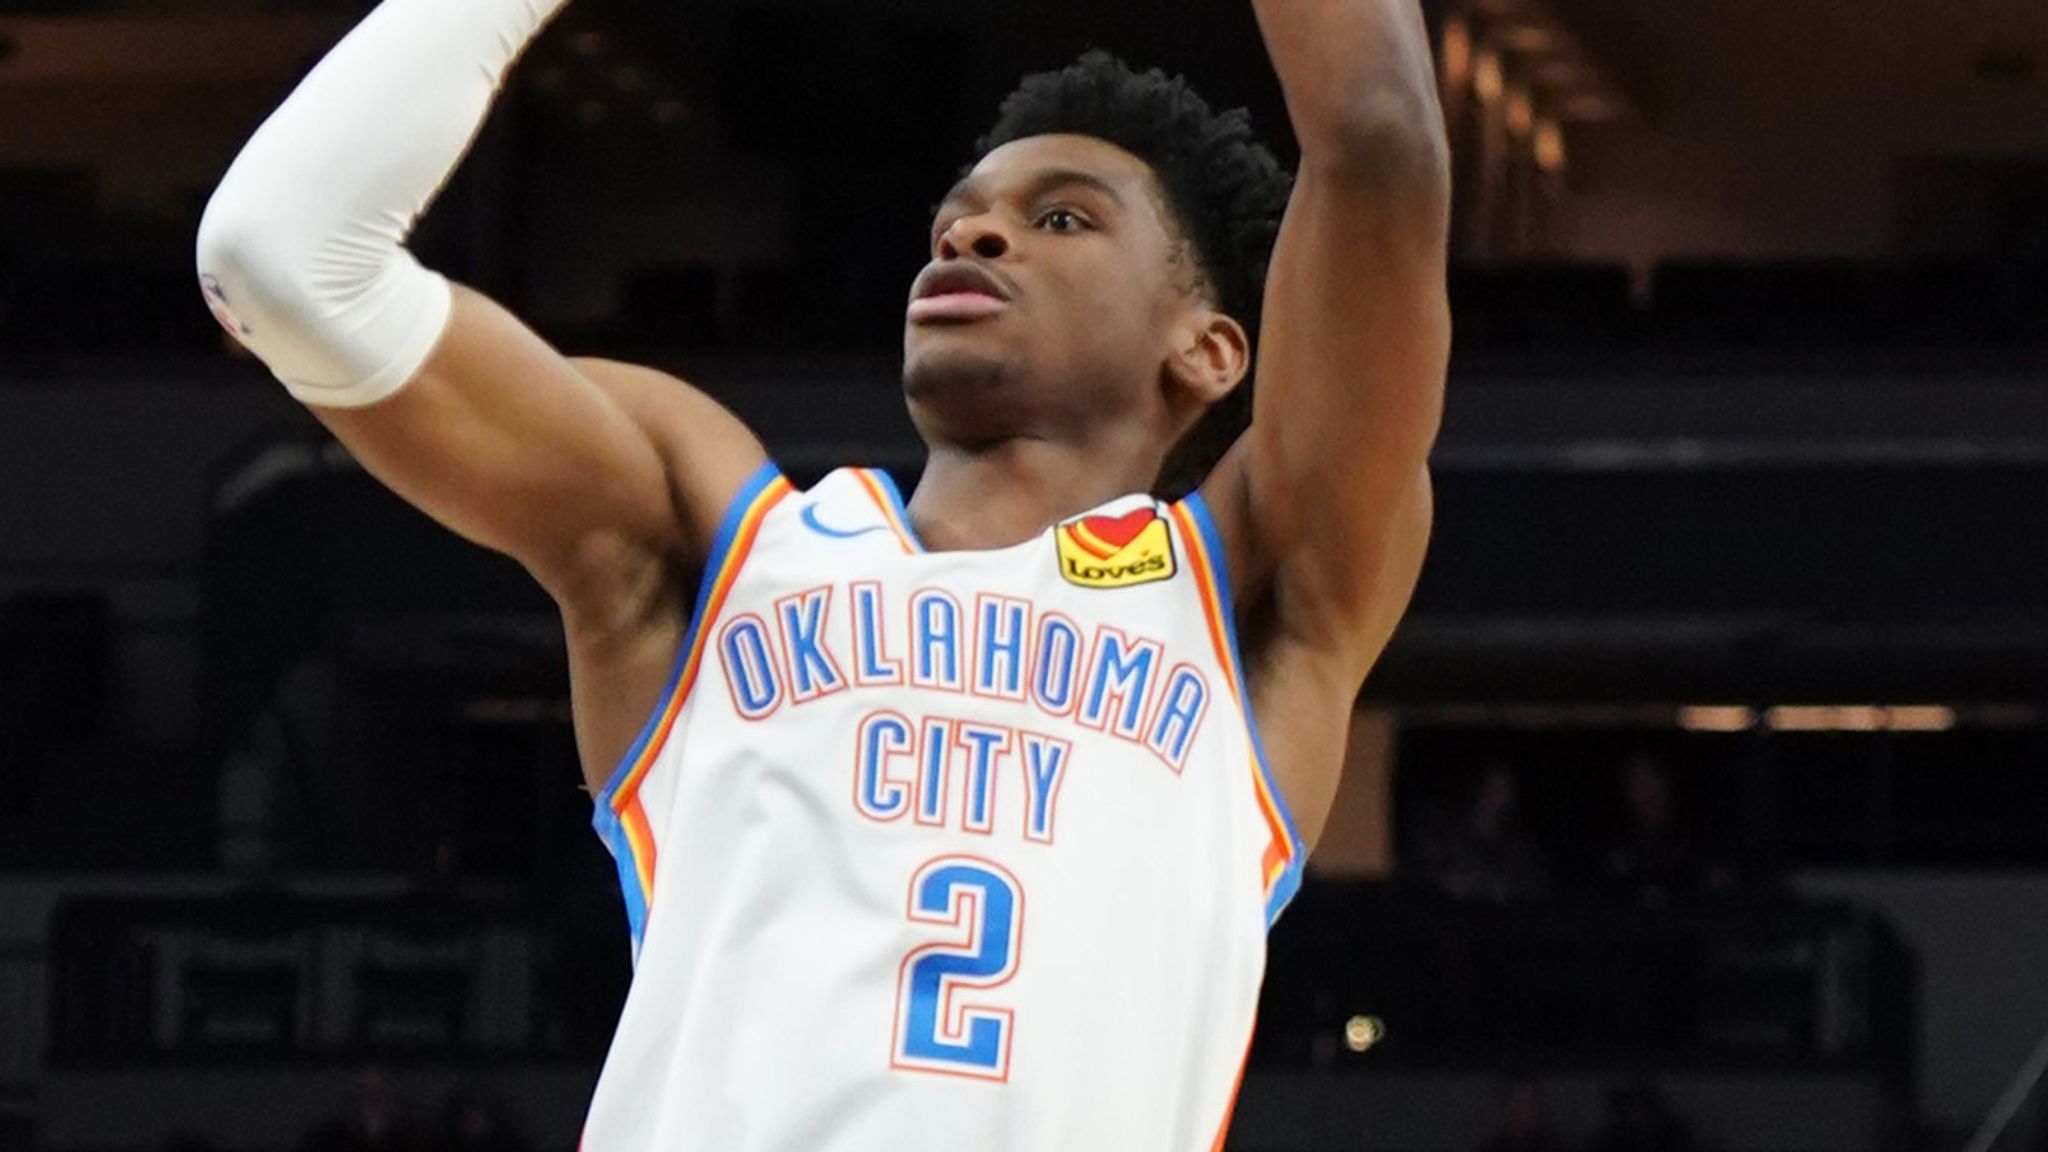 Shai Gilgeous-Alexander was BALLING in the Thunder's 130-109